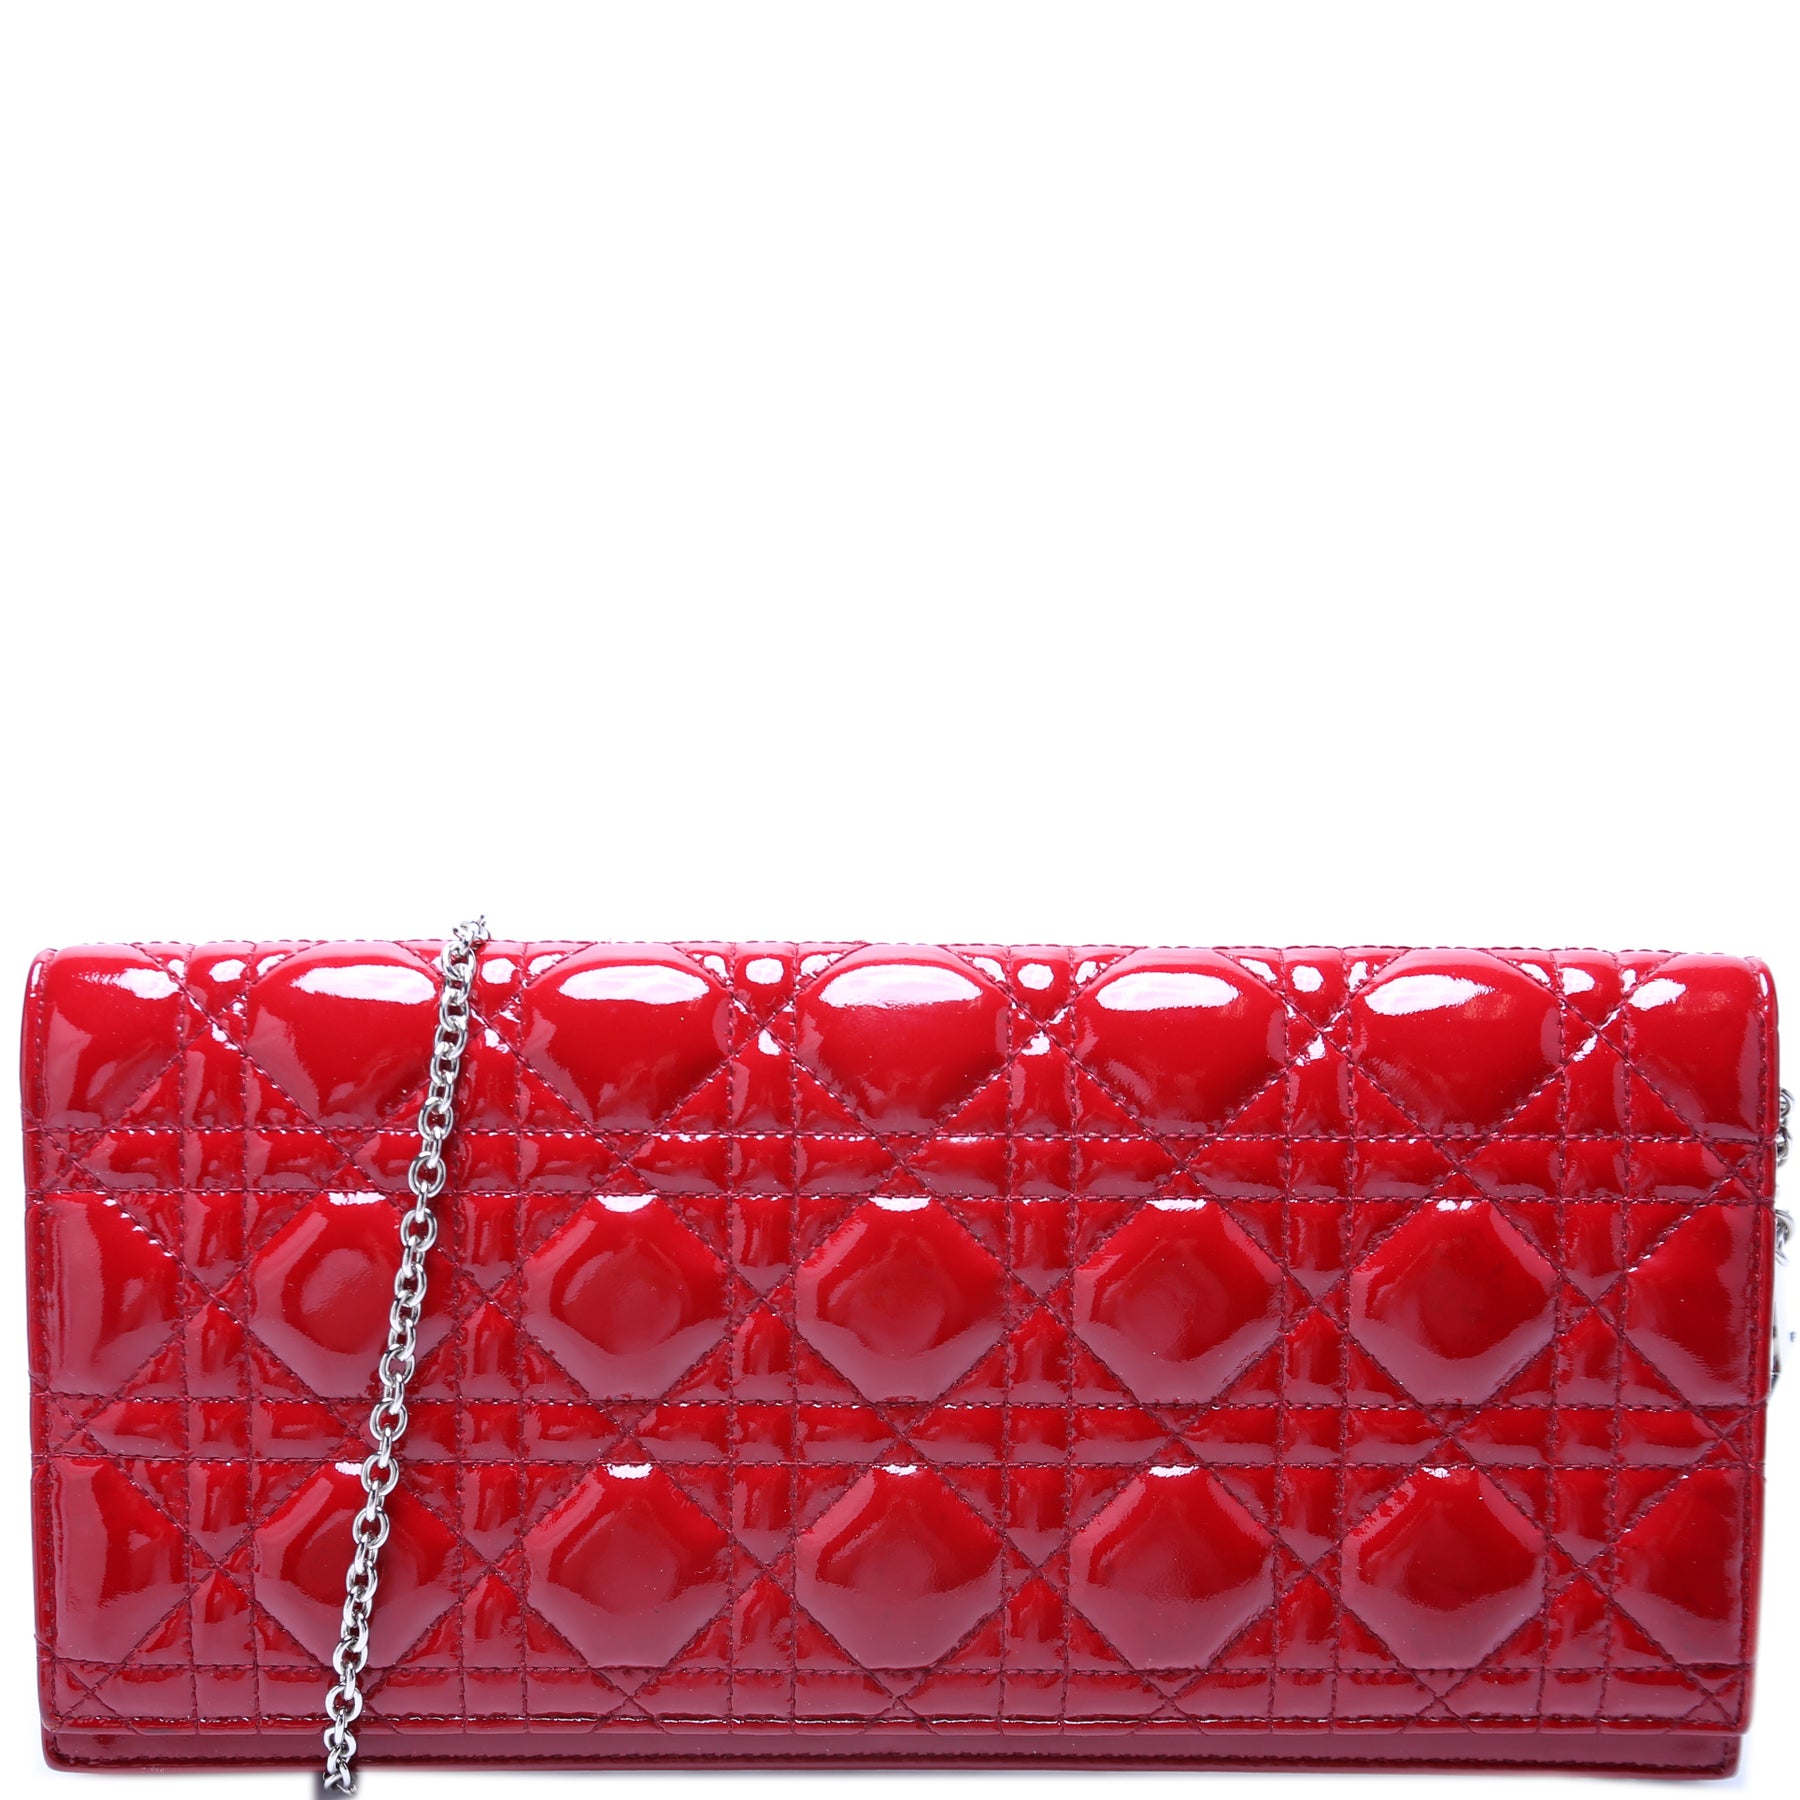 Lady Dior Long Pouch Clutch Patent Cannage